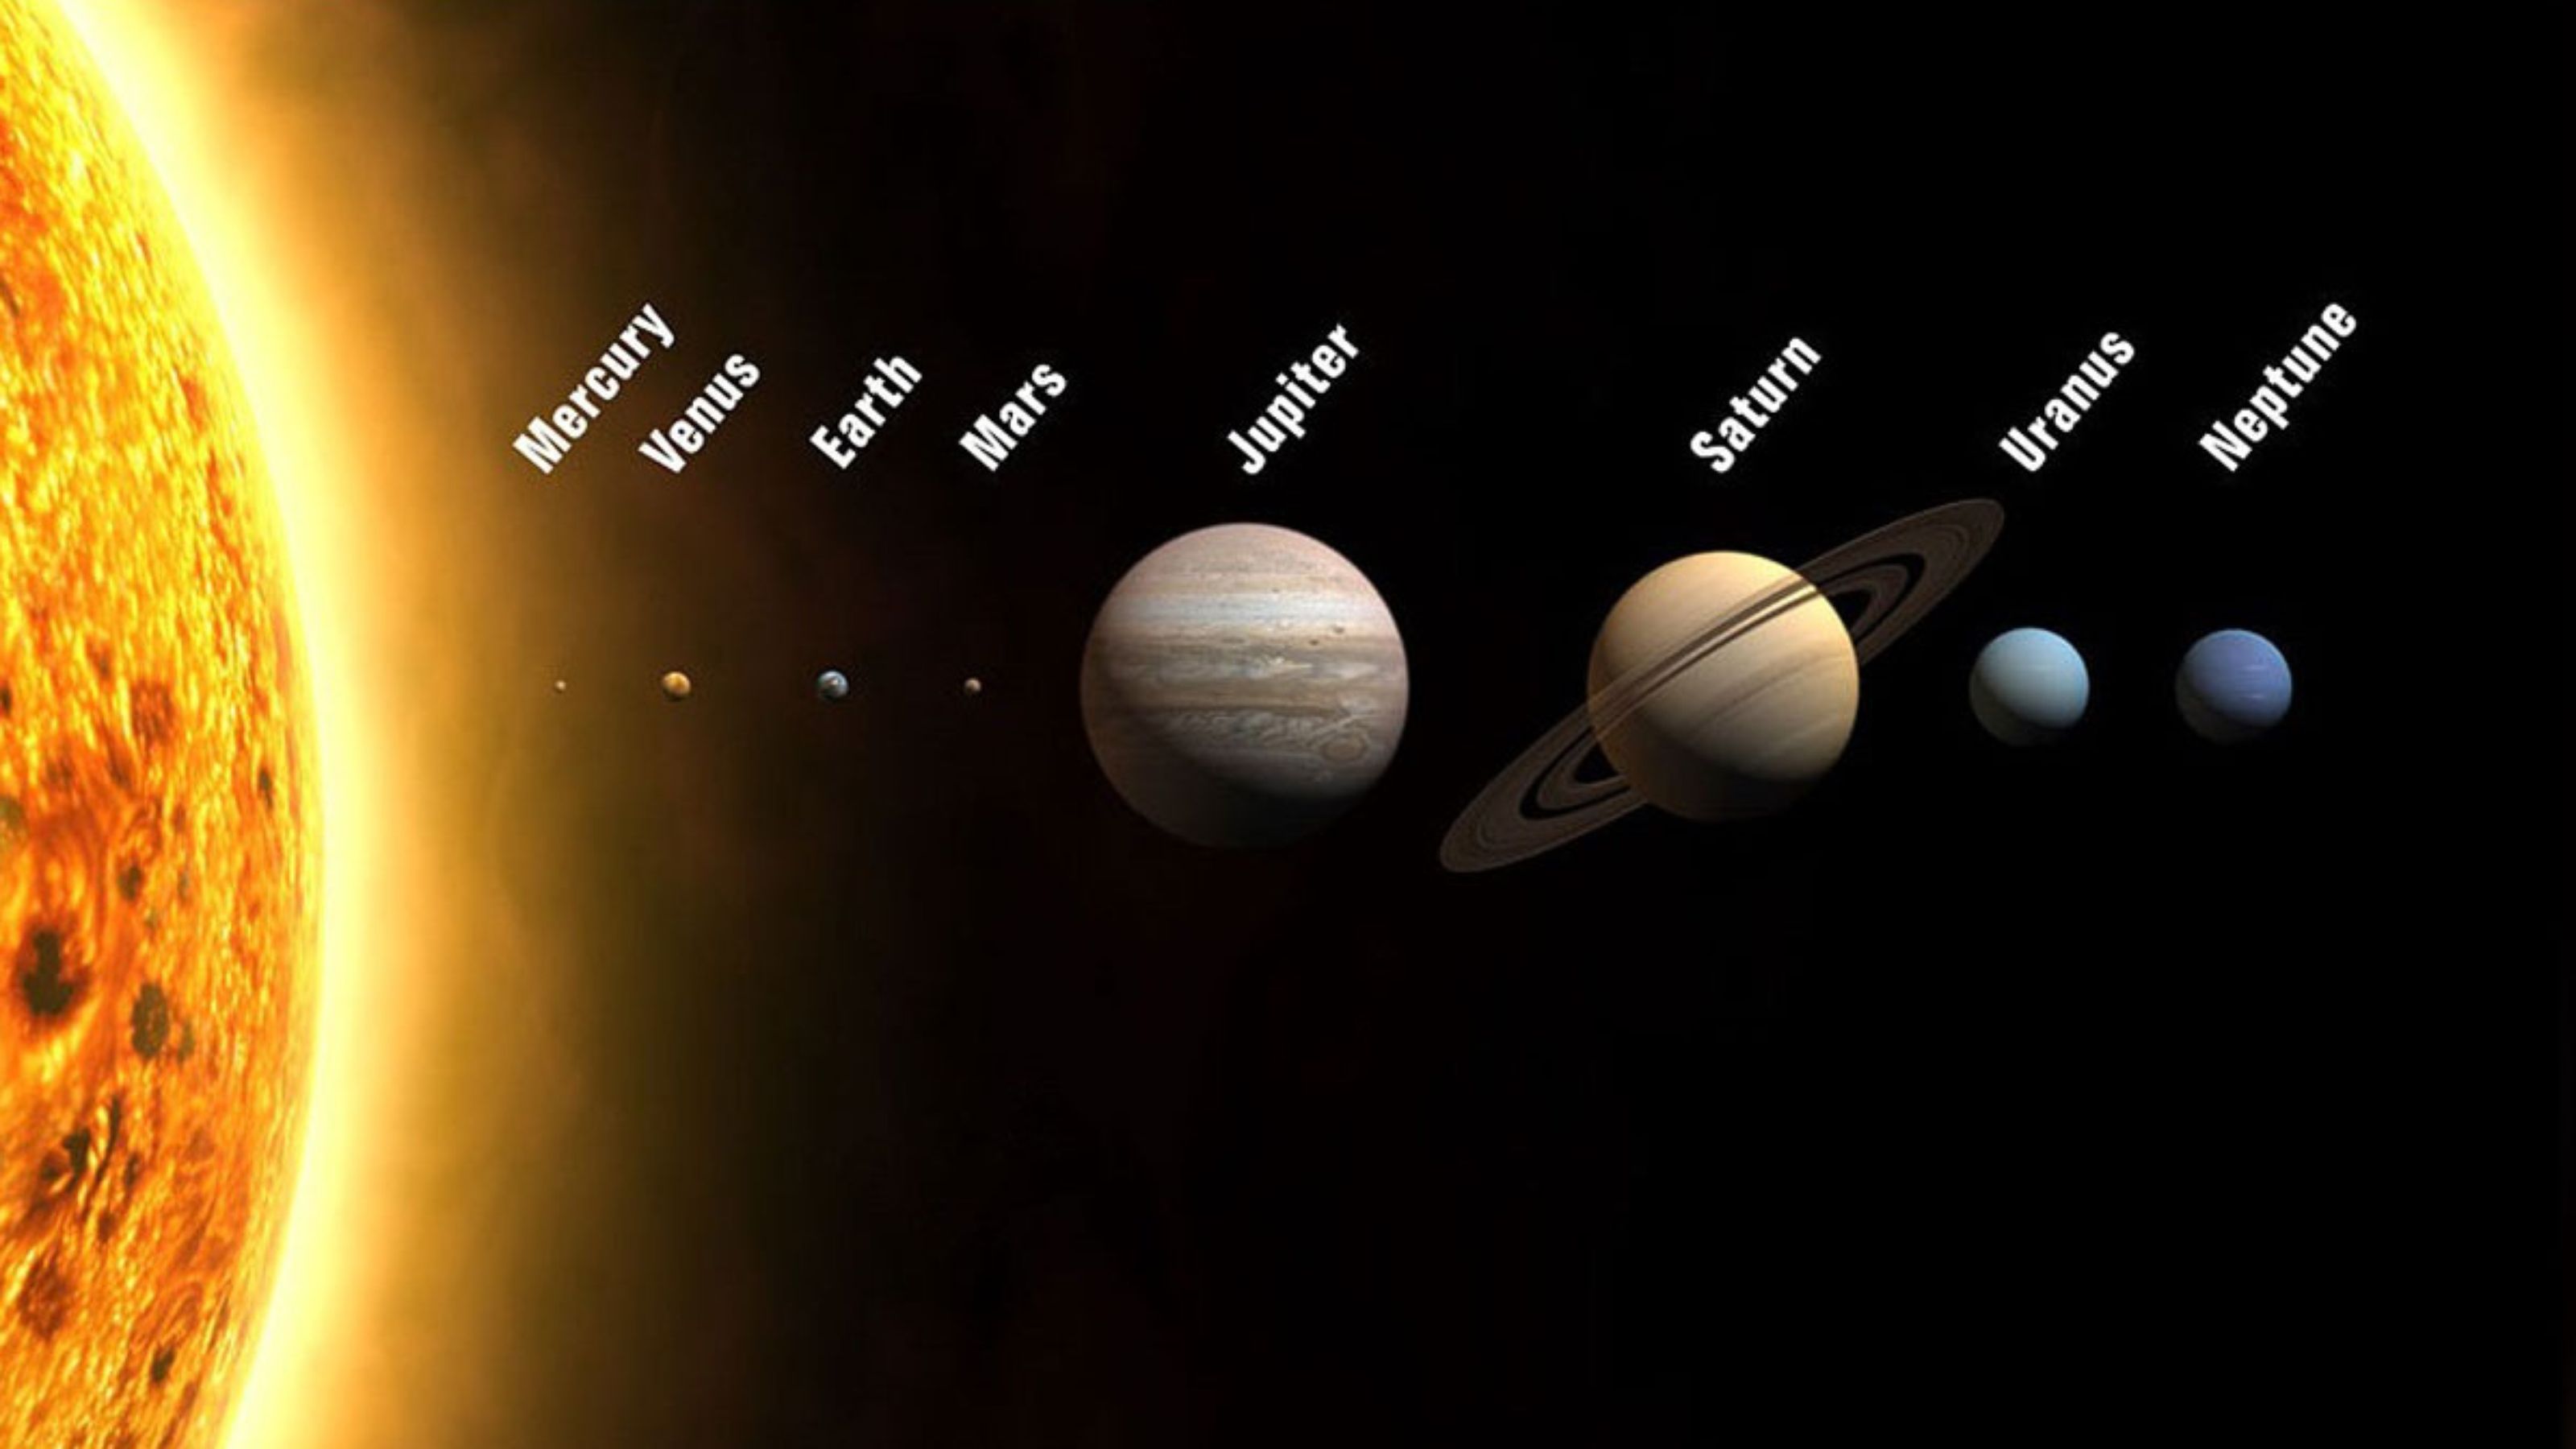 which planets can we see from earth